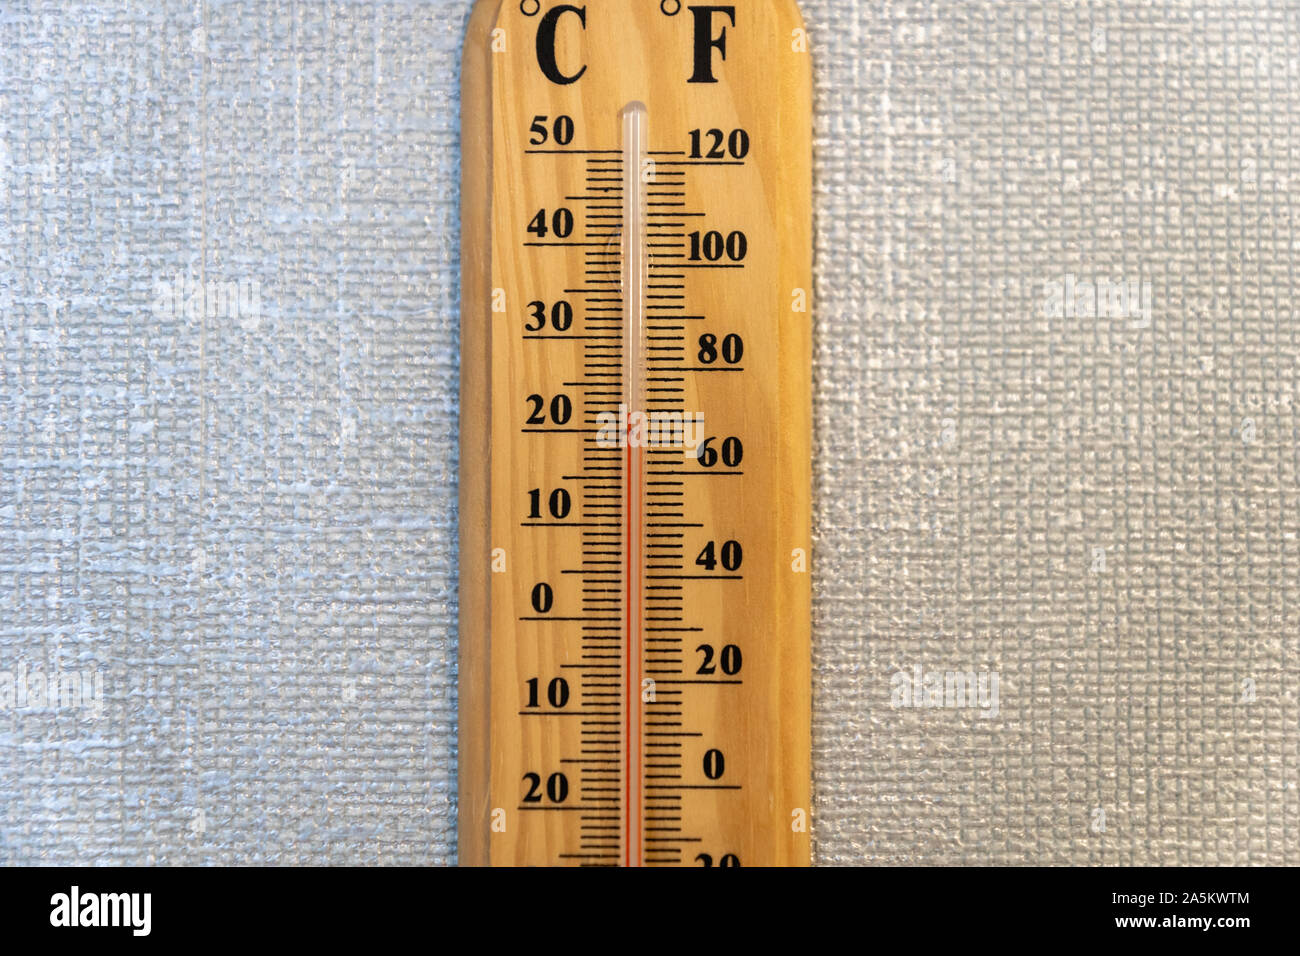 https://c8.alamy.com/comp/2A5KWTM/temperature-gauge-thermometer-on-the-white-wall-analog-temperature-gauge-close-up-2A5KWTM.jpg